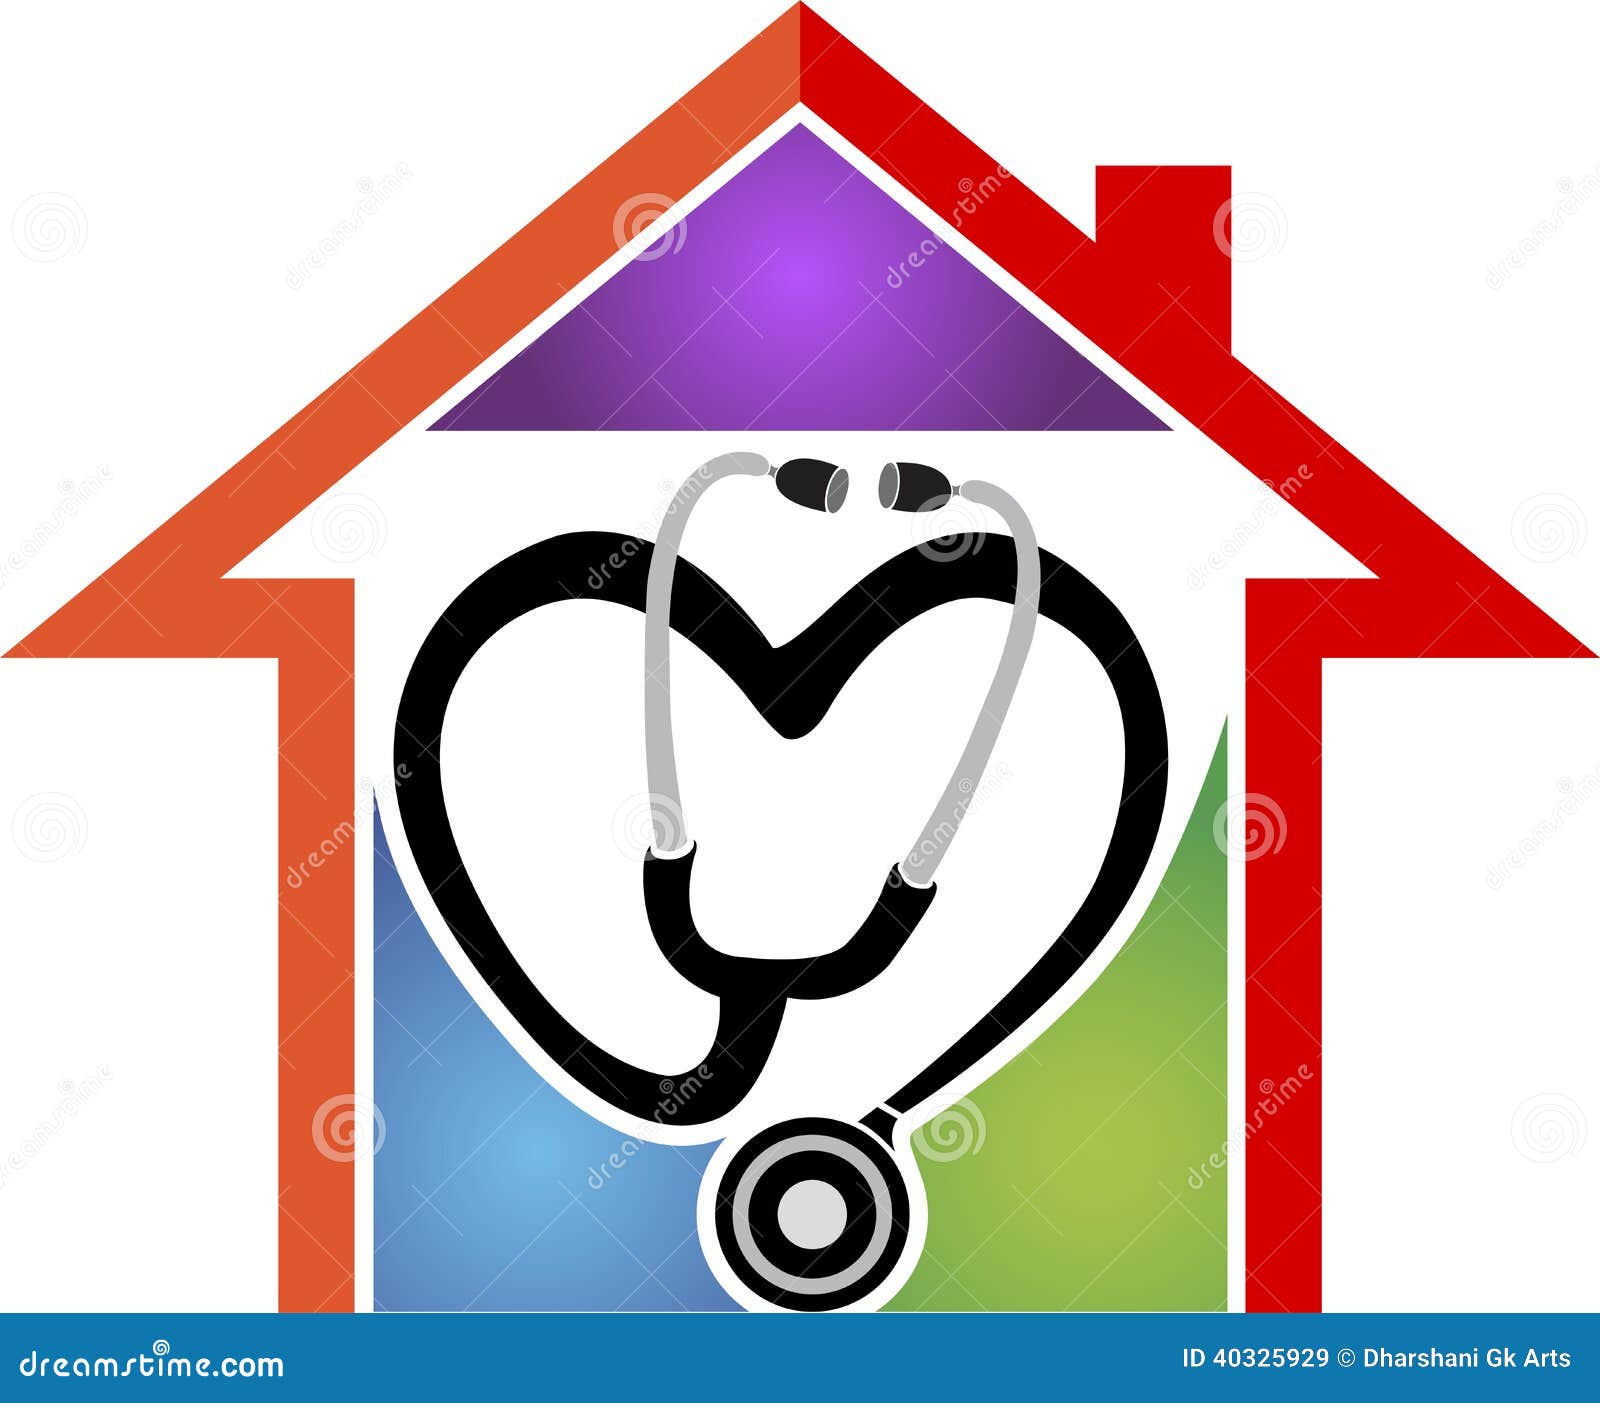 clipart home care - photo #5